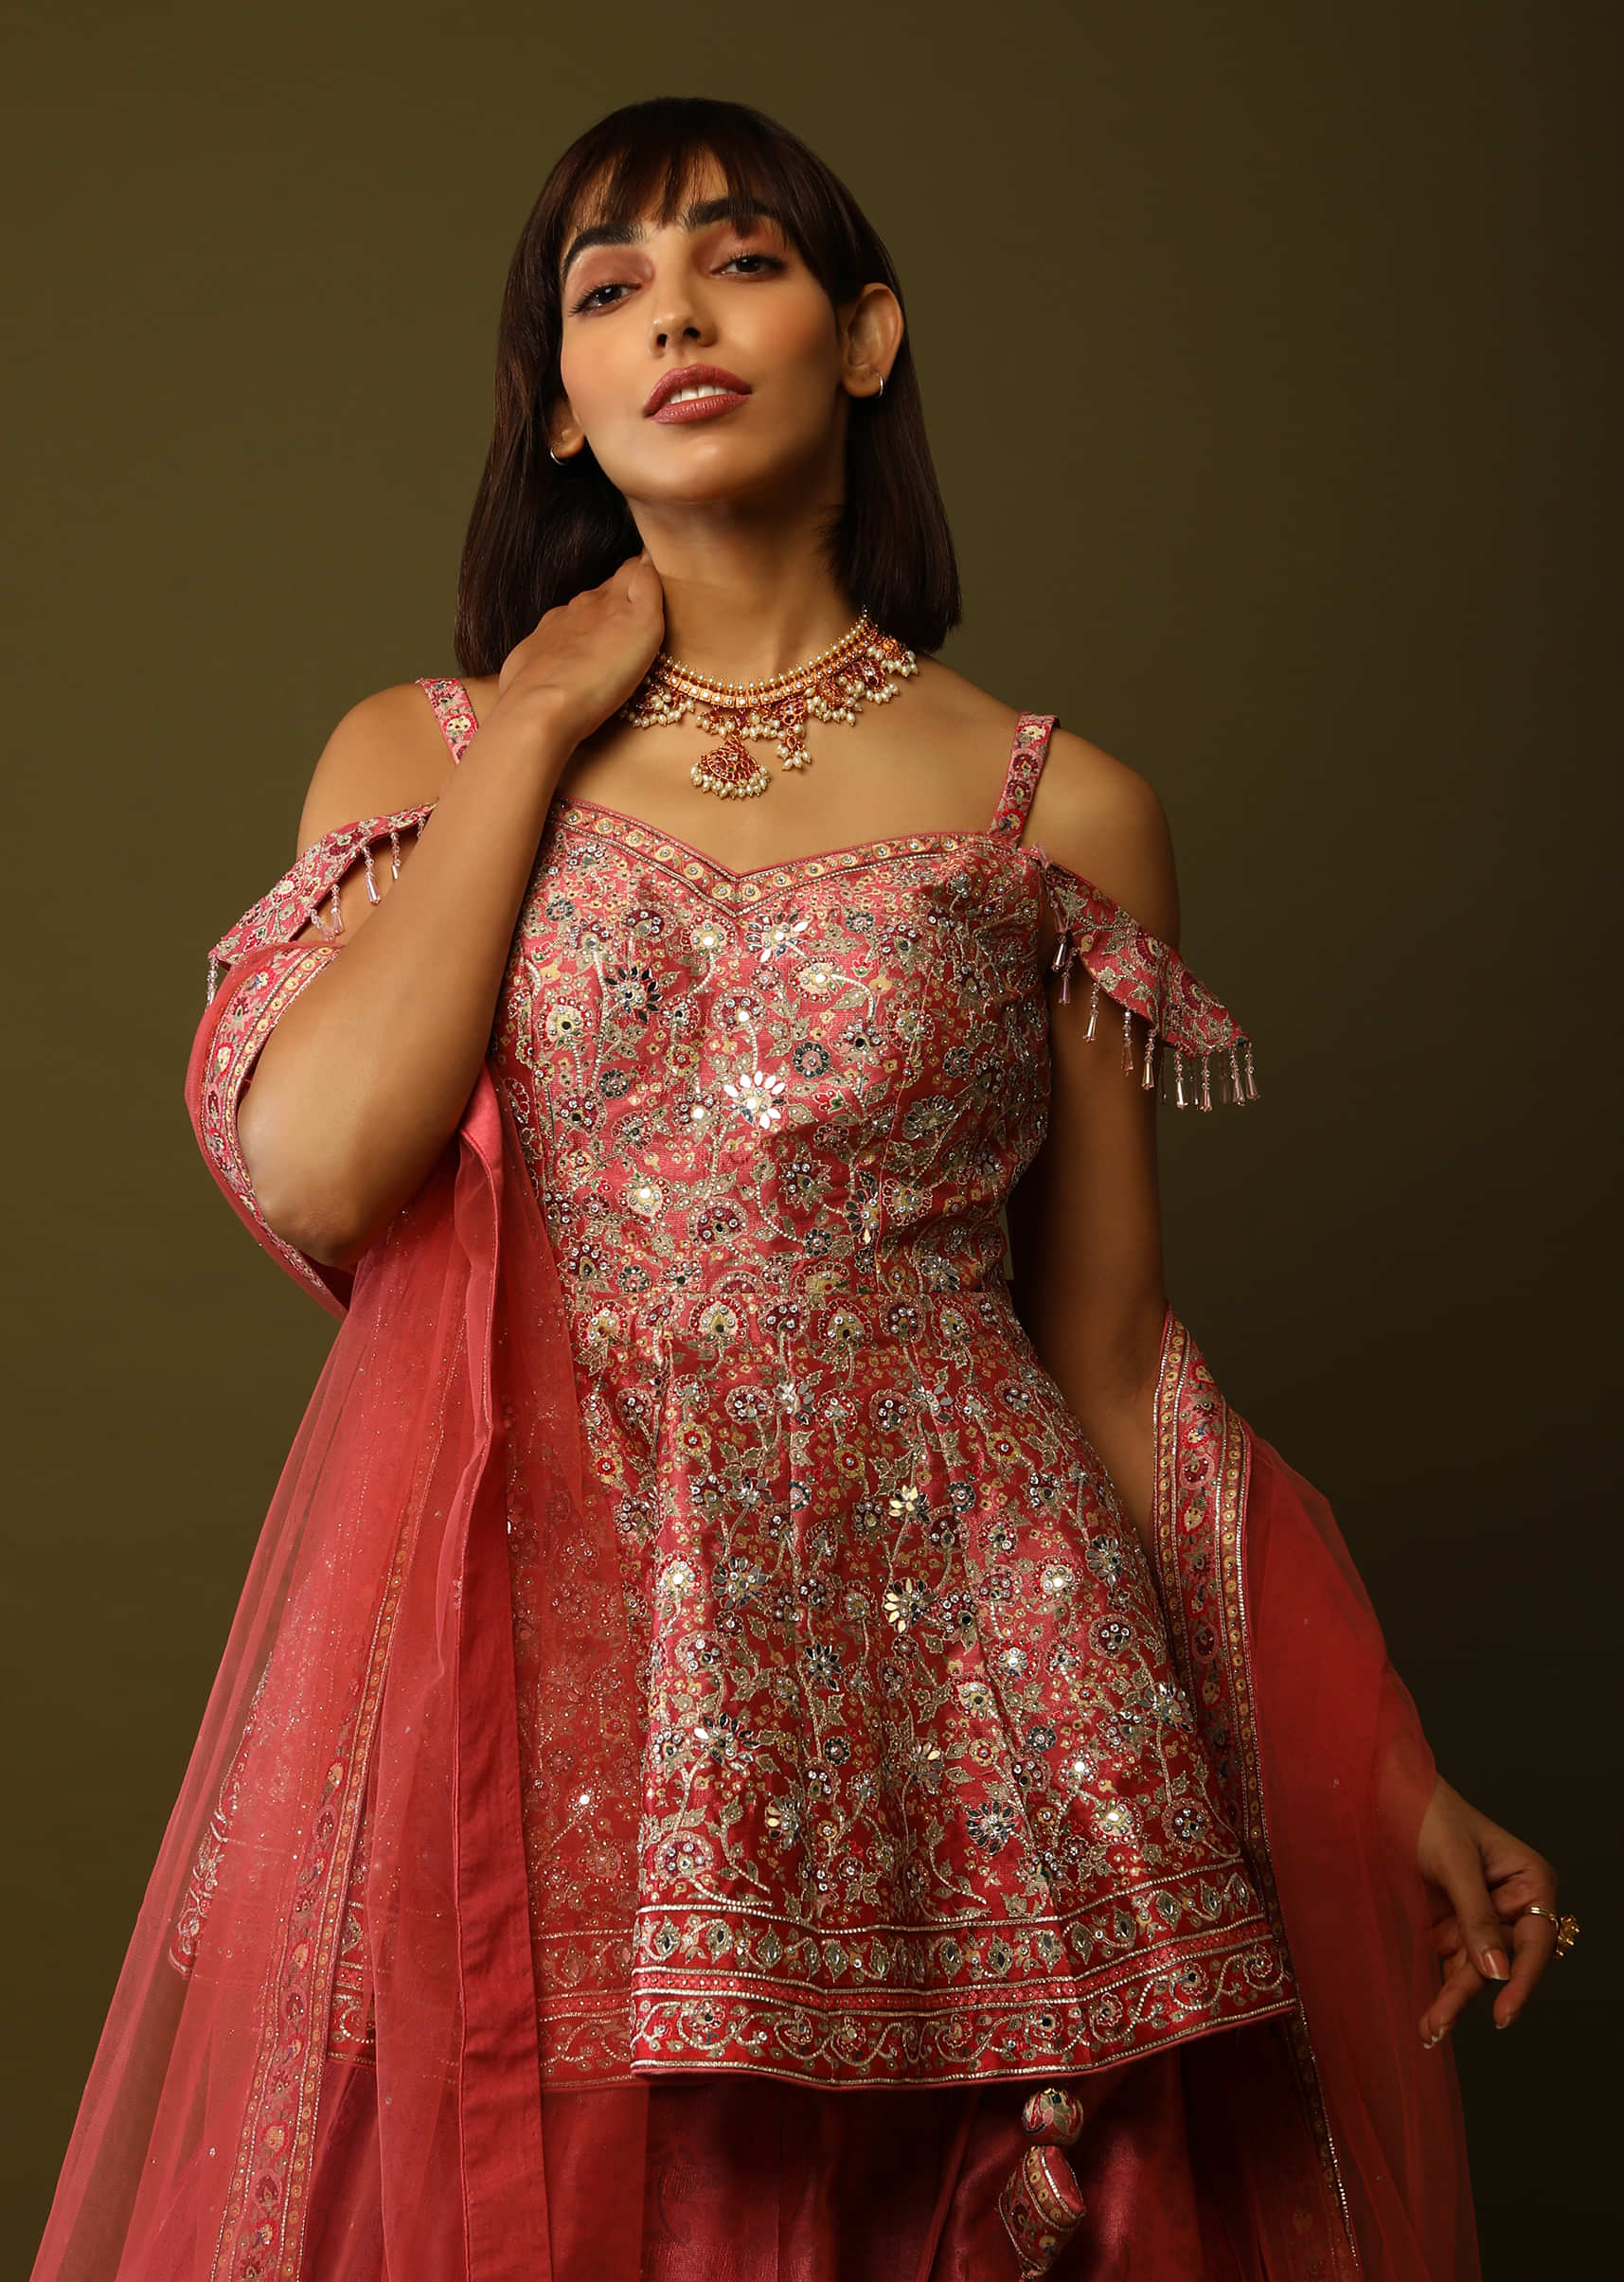 Coral Peach And Red Shaded Lehenga And Peplum Top With Floral Print, Mirror Work And Cold Shoulder Sleeves Online - Kalki Fashion